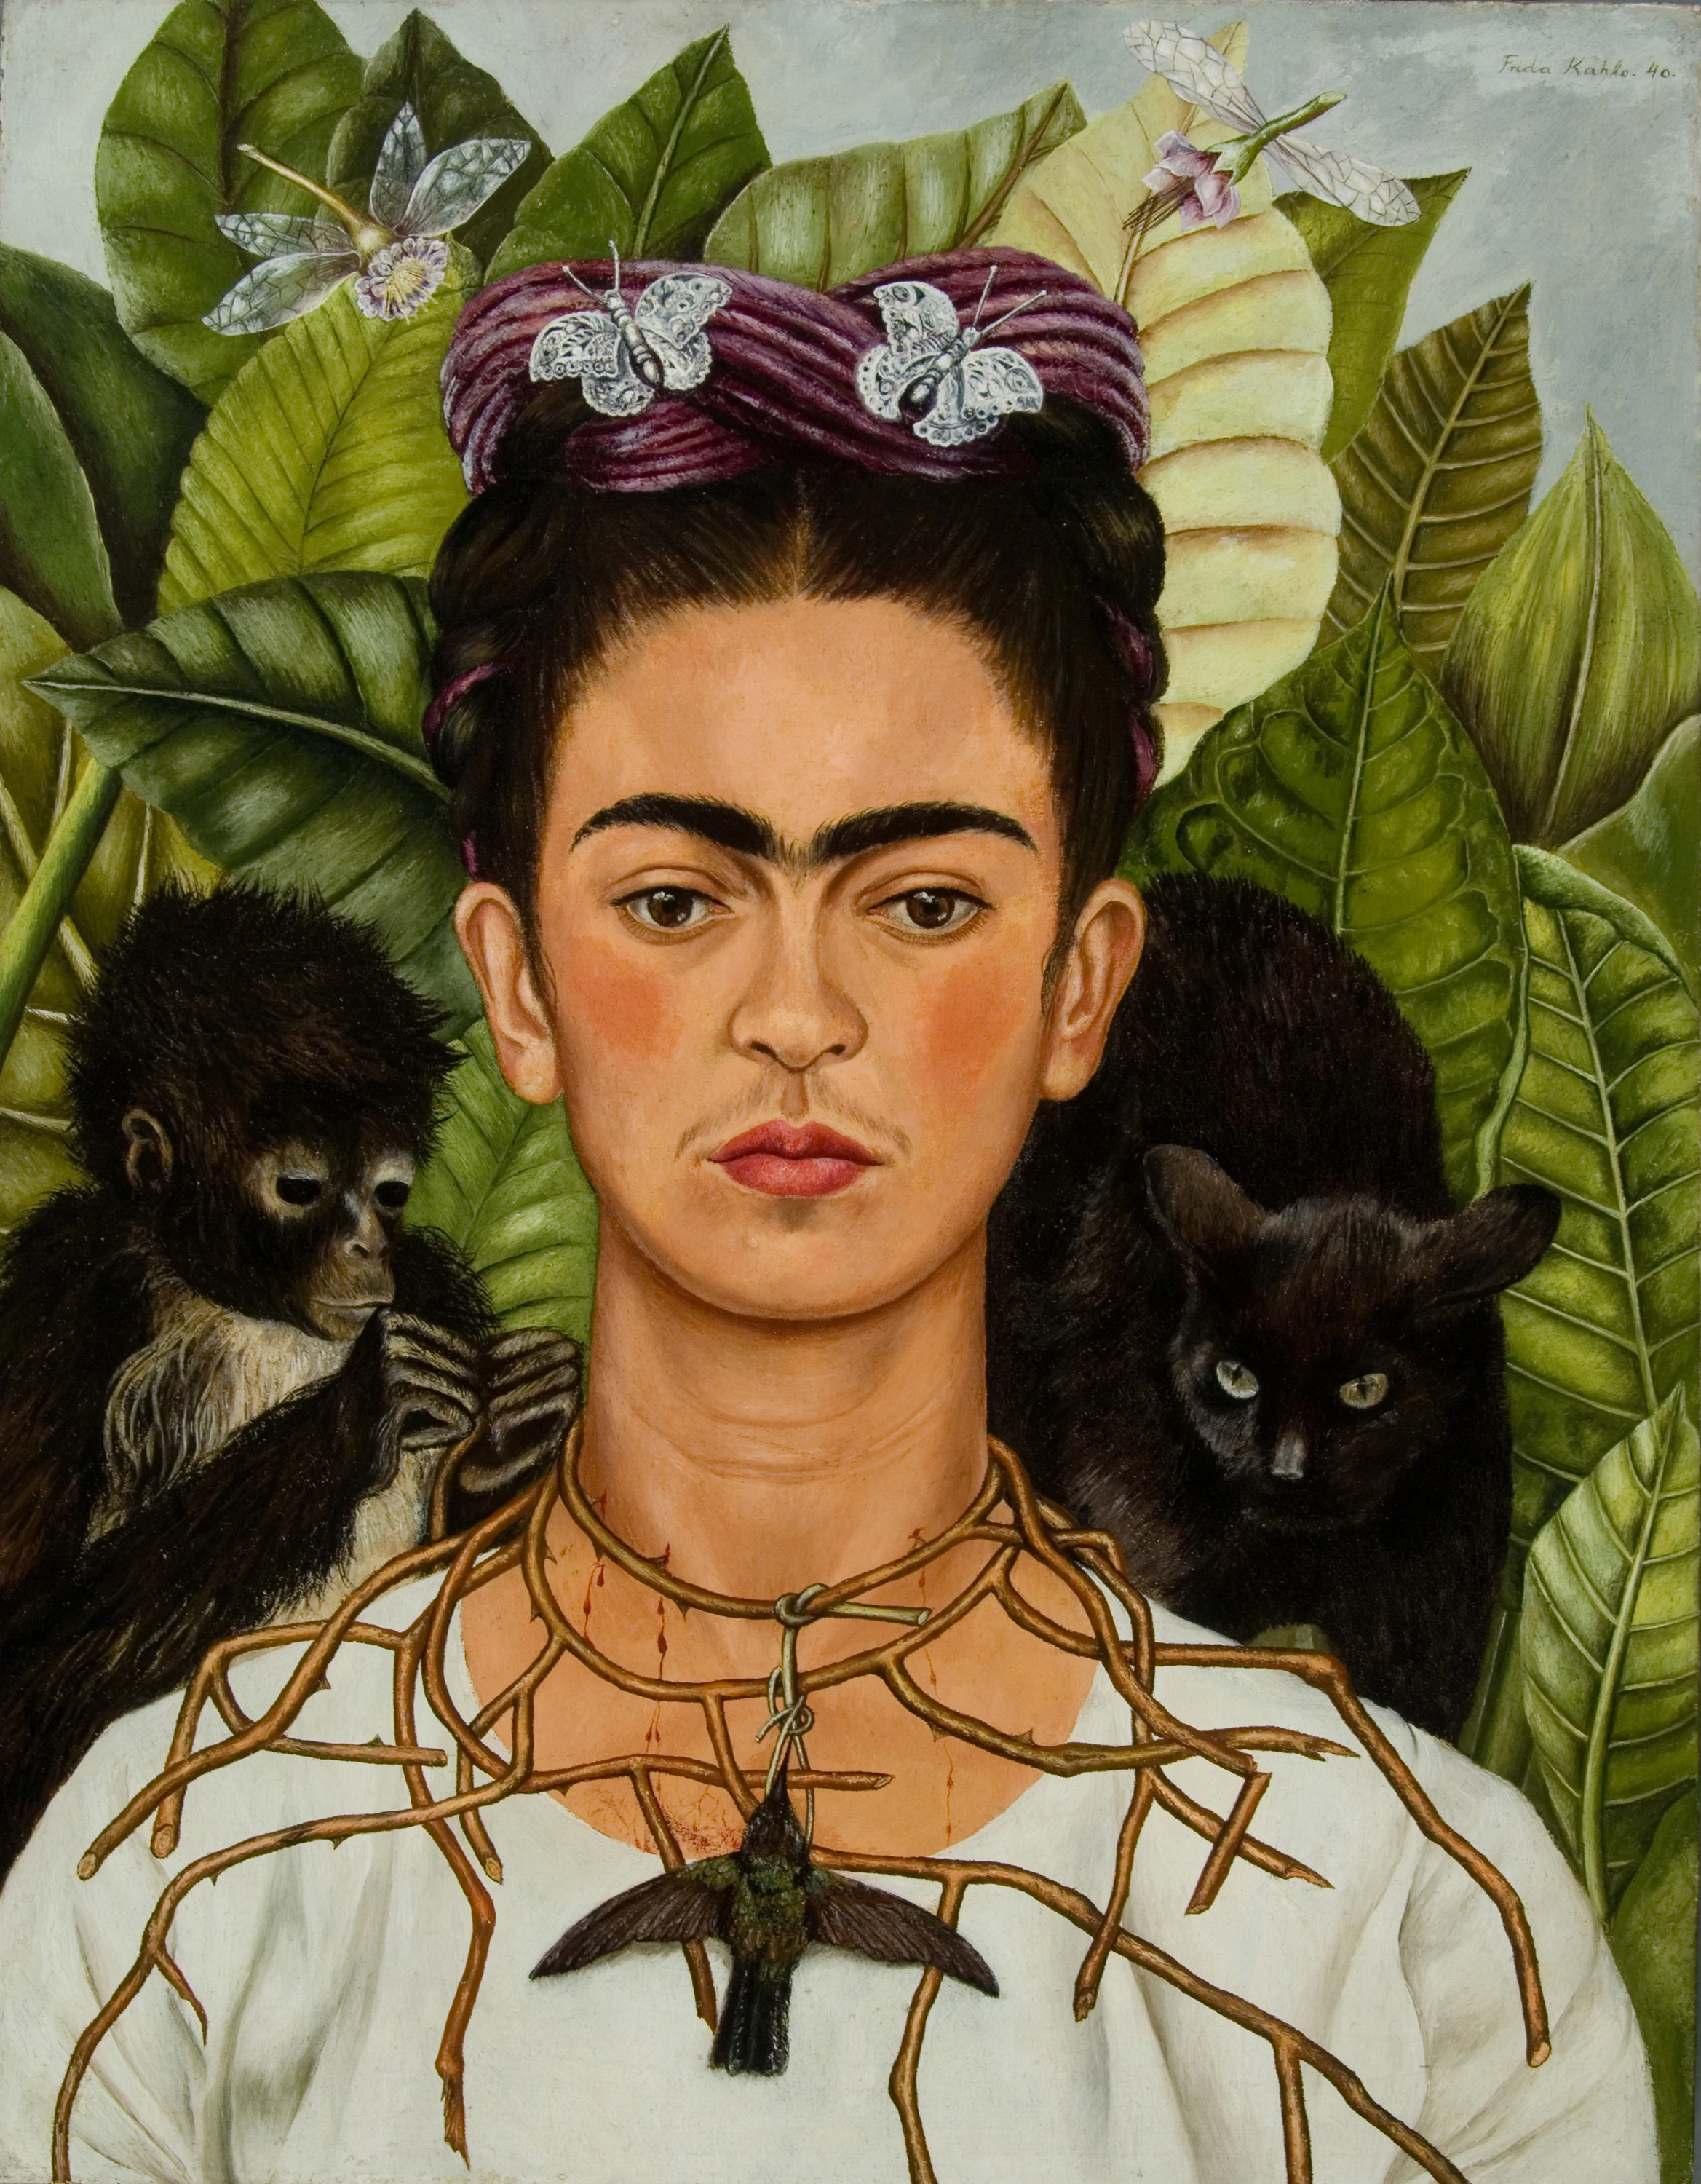 Self-Portrait with Thorn Necklace and Hummingbird, Frida Kahlo